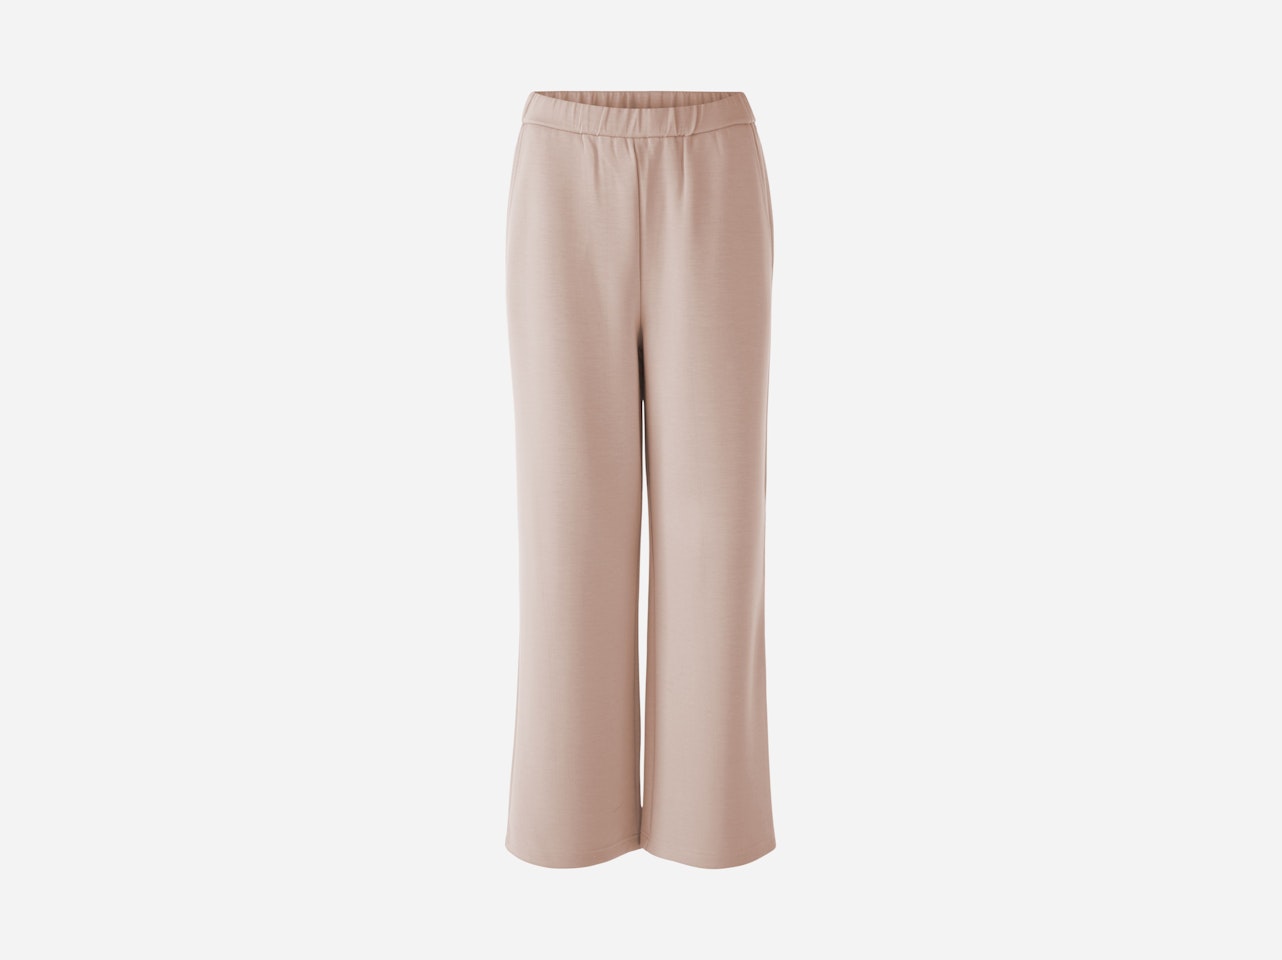 Culotte with elastic waistband